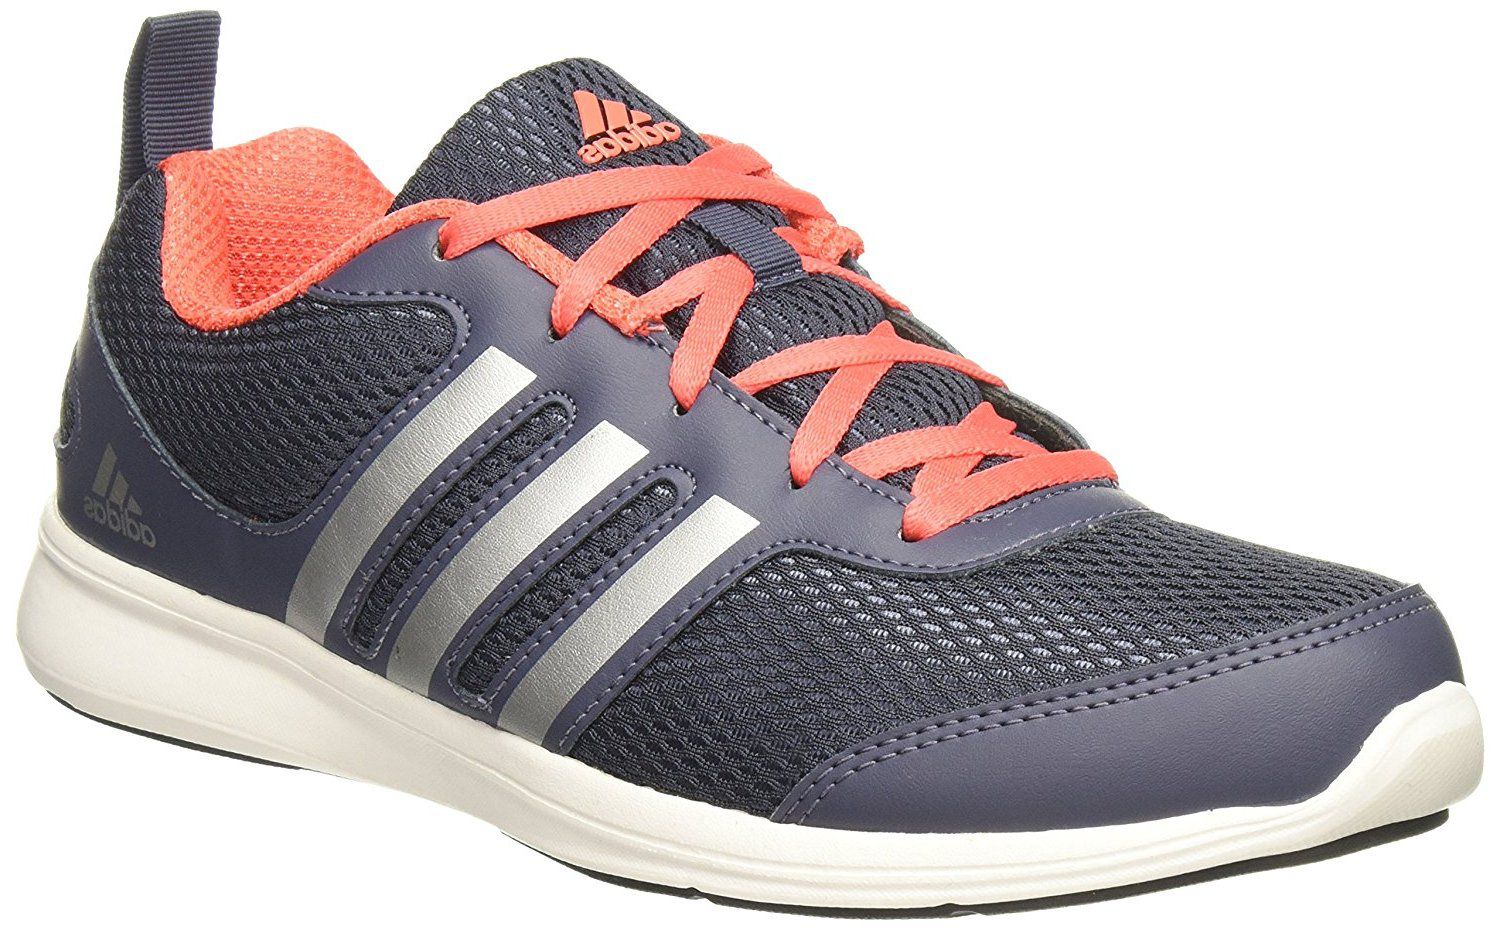 Adidas Blue Running Shoes Price in India- Buy Adidas Blue Running Shoes ...